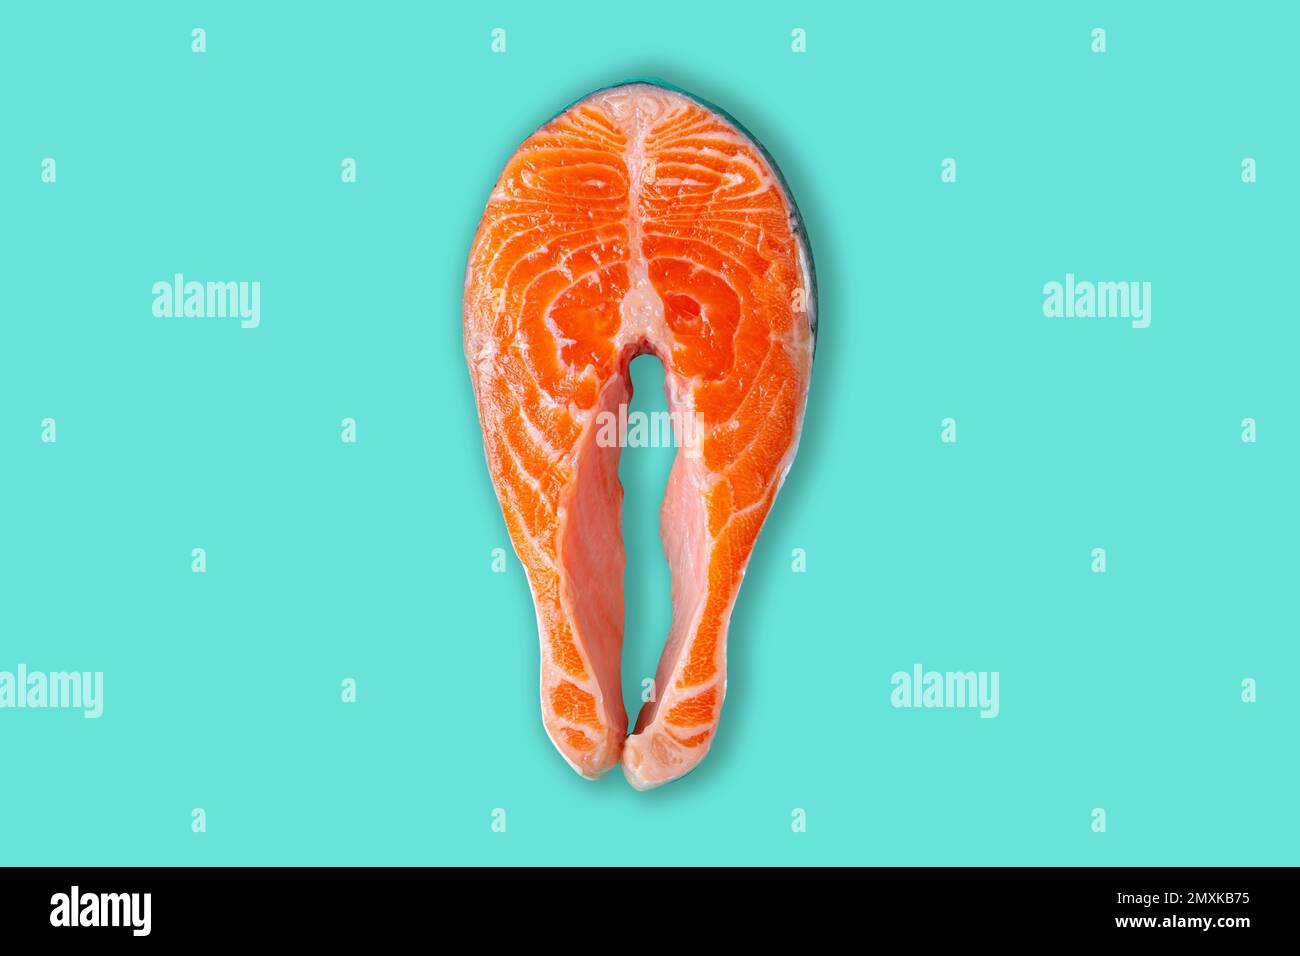 Raw fresh fish salmon steak top view on blue clean background from above, delicacy healthy fish eating and nutrition concept flat lay Stock Photo